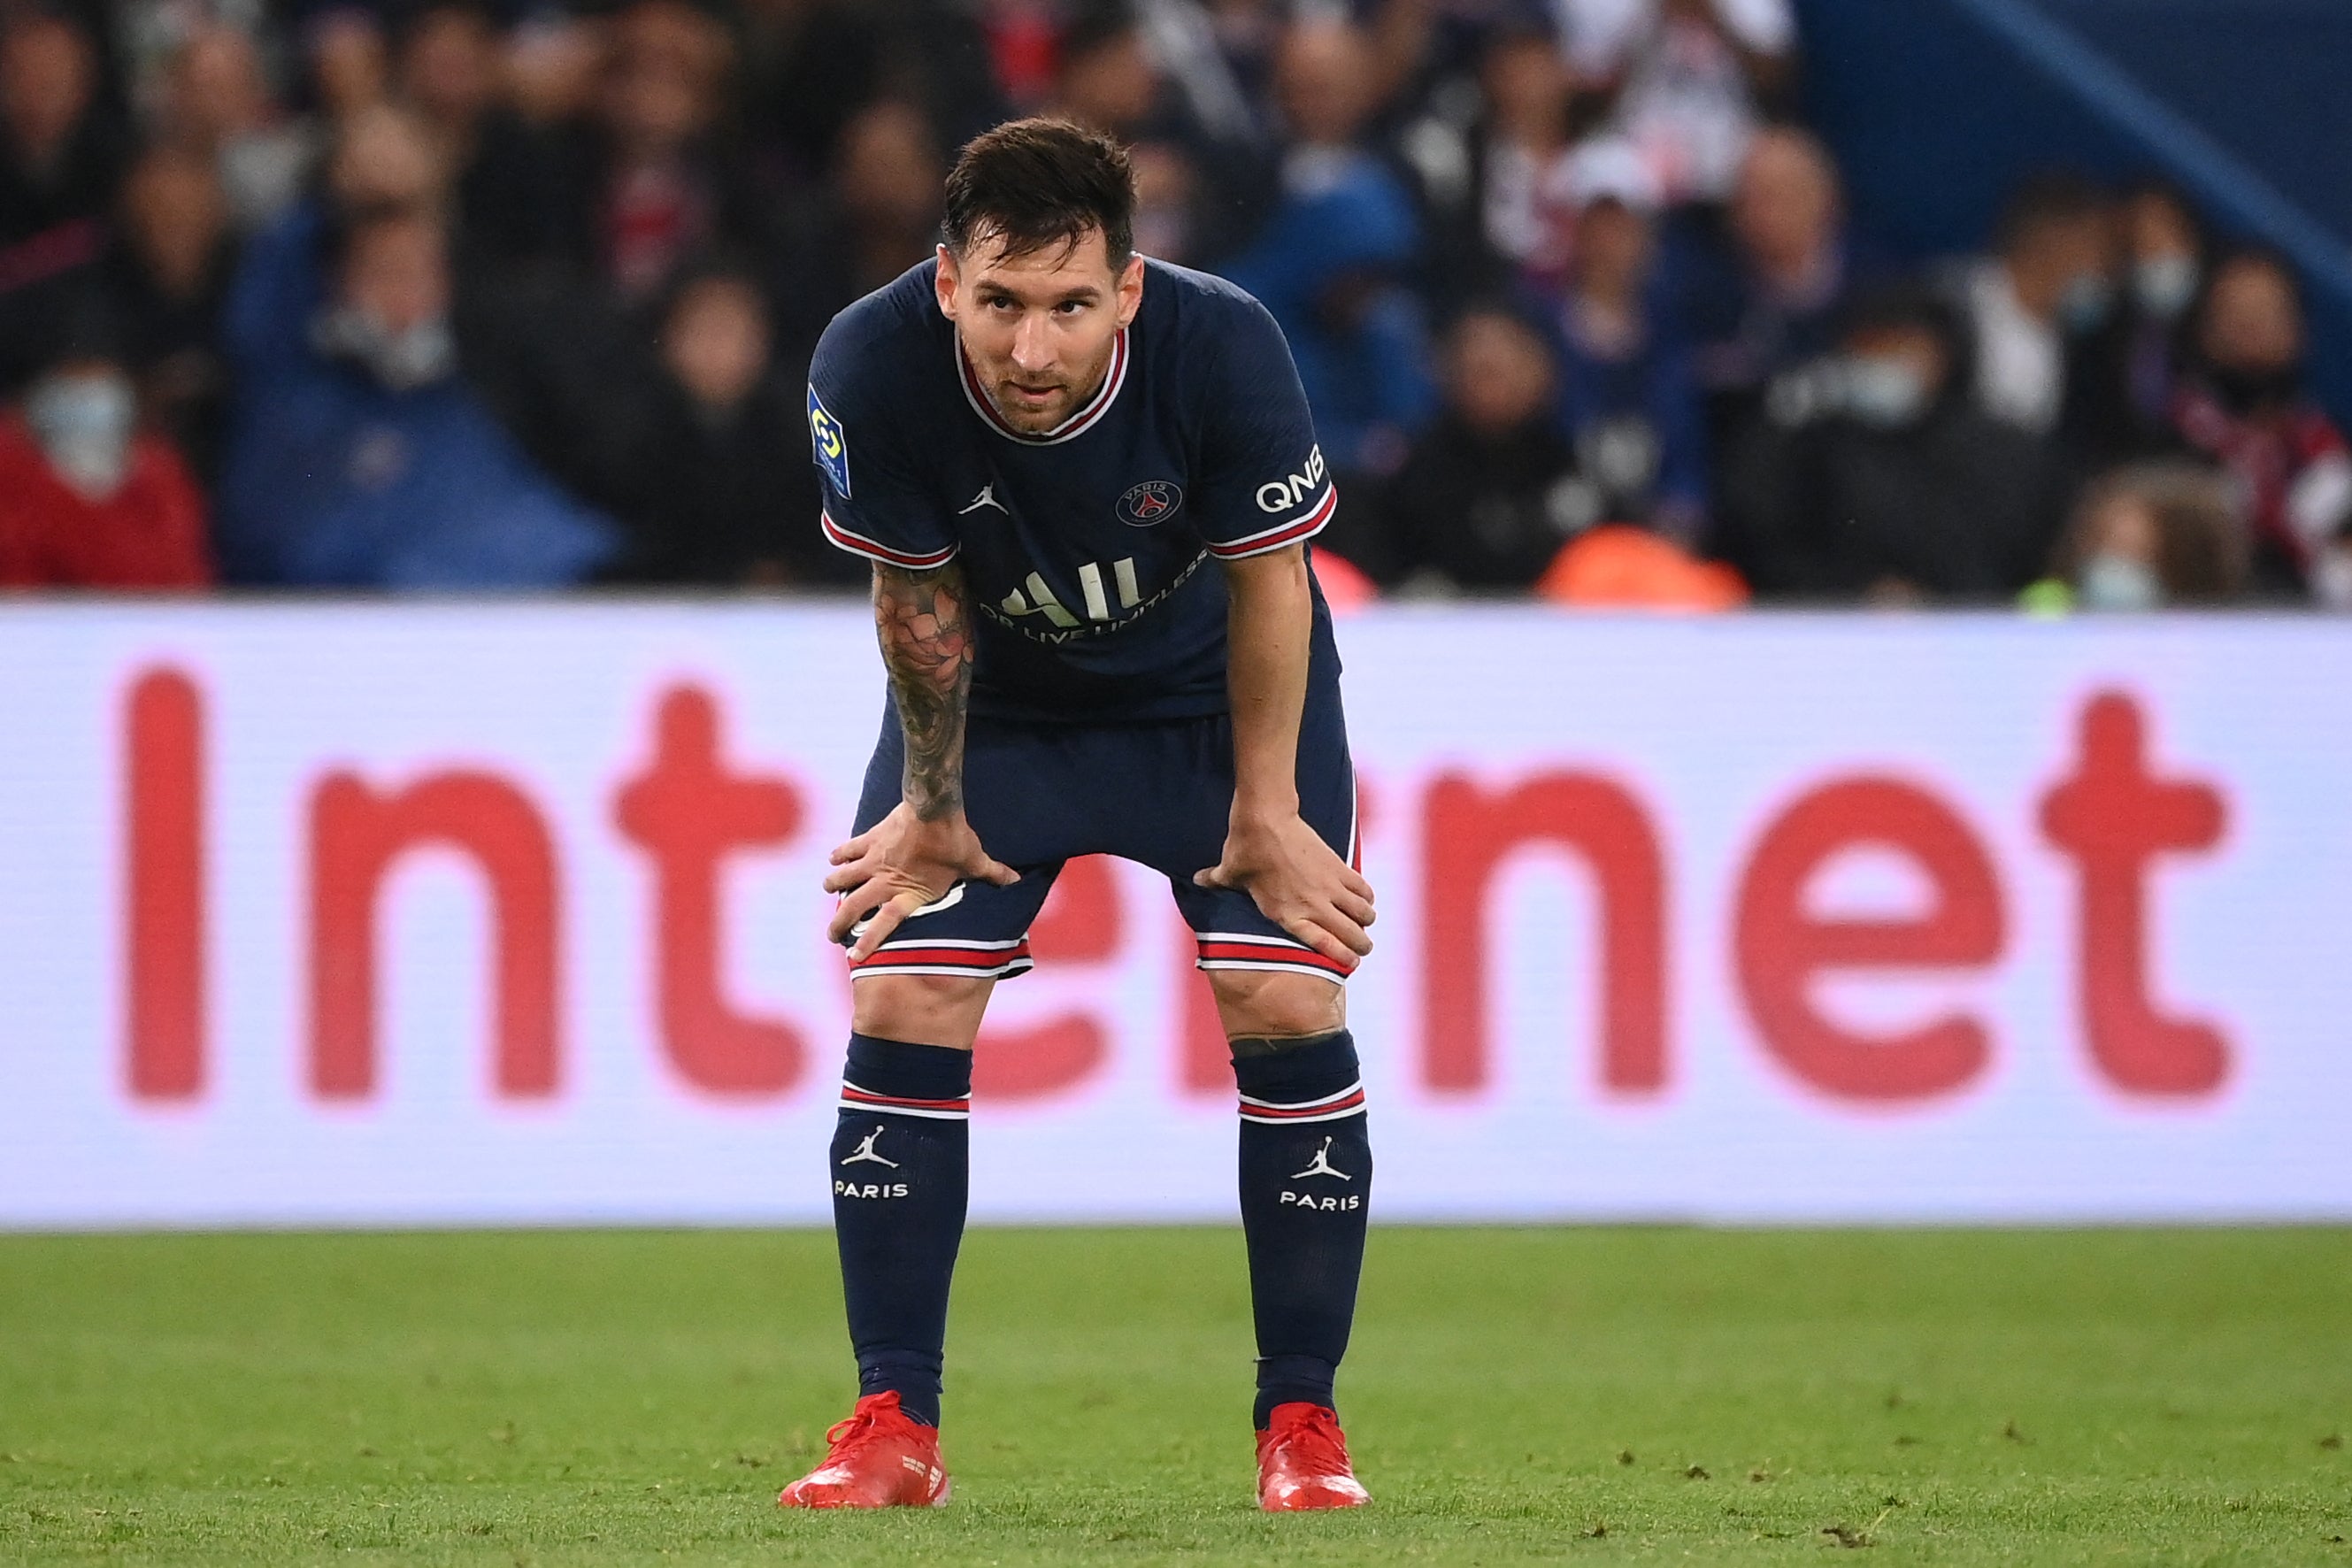 Lionel Messi has been ruled out of PSG’s trip to Metz